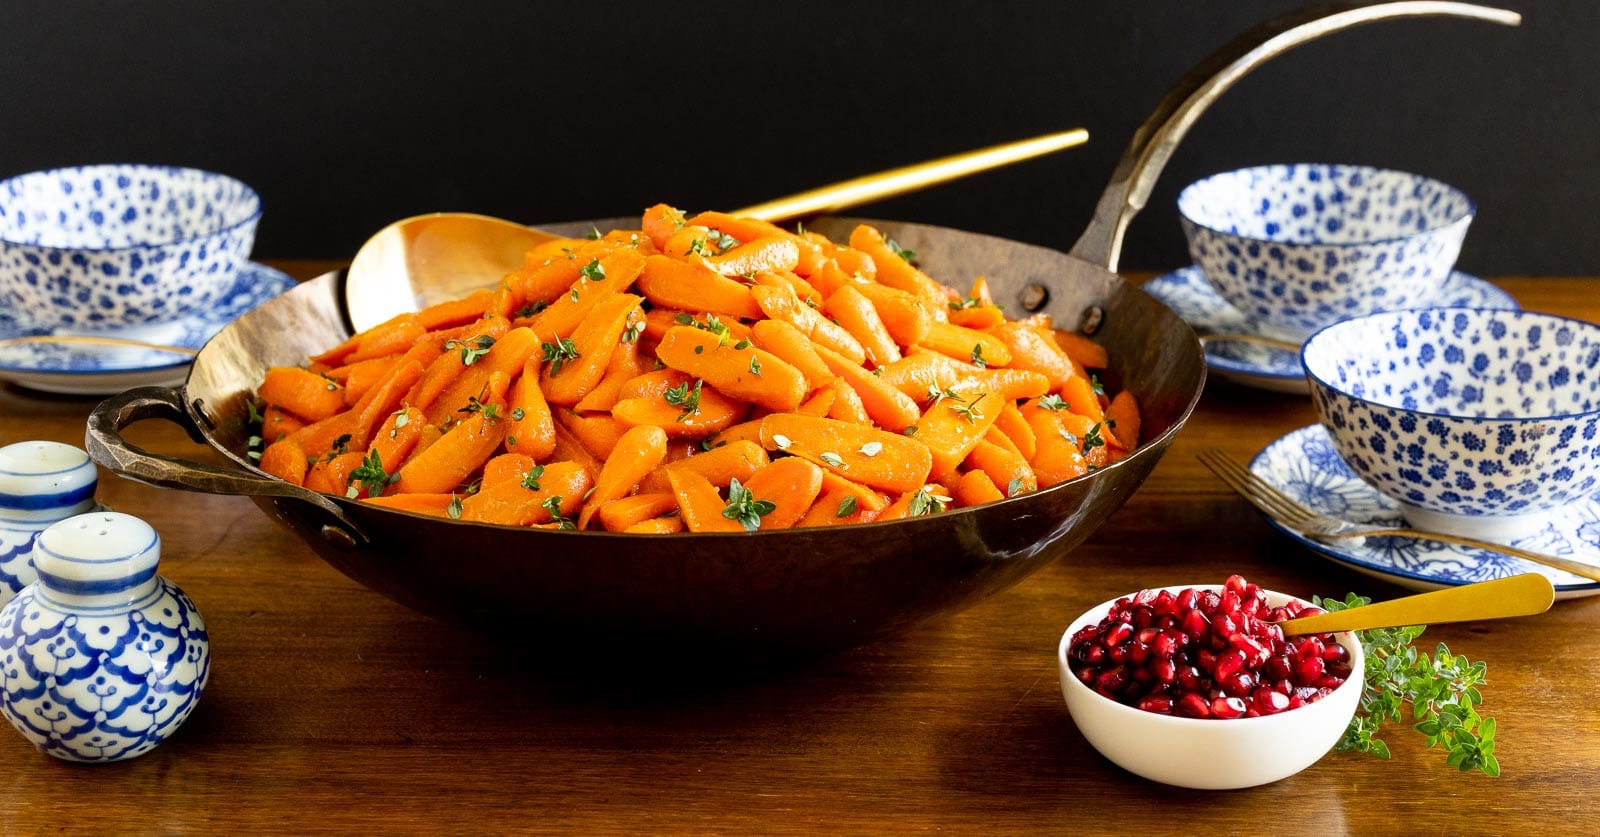 Horizontal photo of a hammered steel pan of Stove-top Honey Glazed Carrots on a wood table with a side of pomegranate arils.